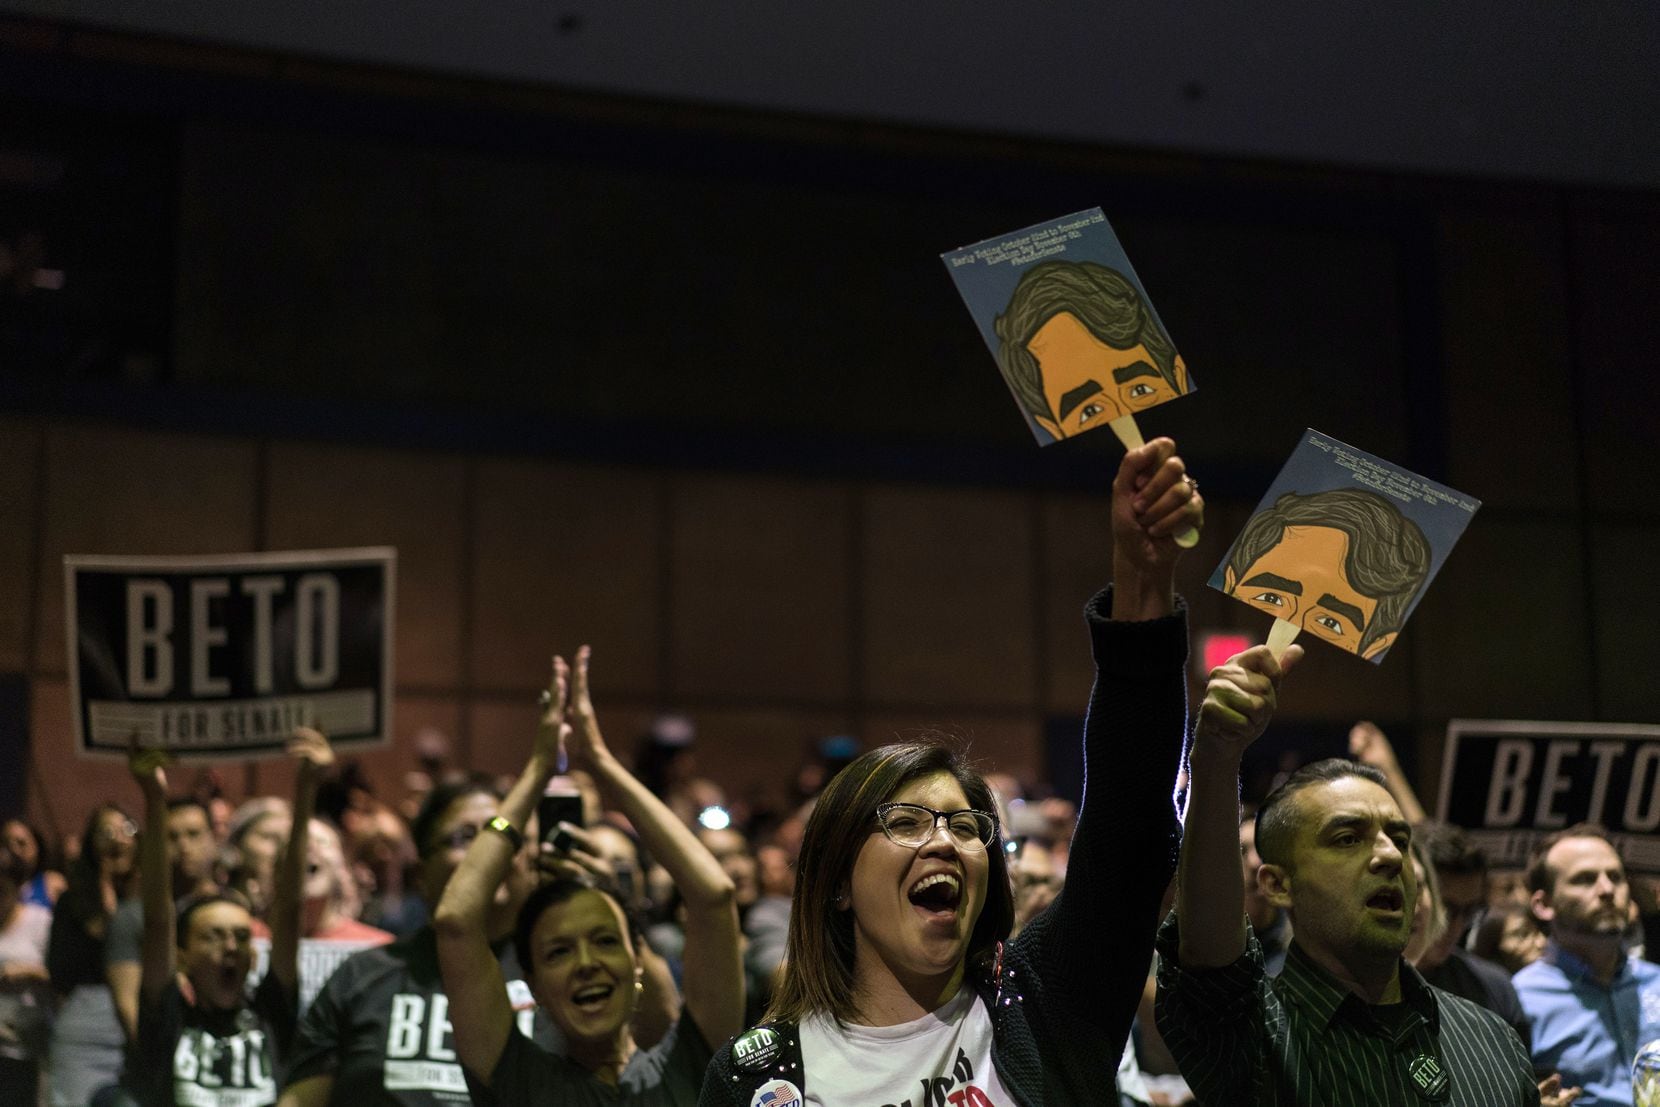 Supporters cheered for Rep. Beto O'Rourke, the Democratic challenger to Sen. Ted Cruz, as he...